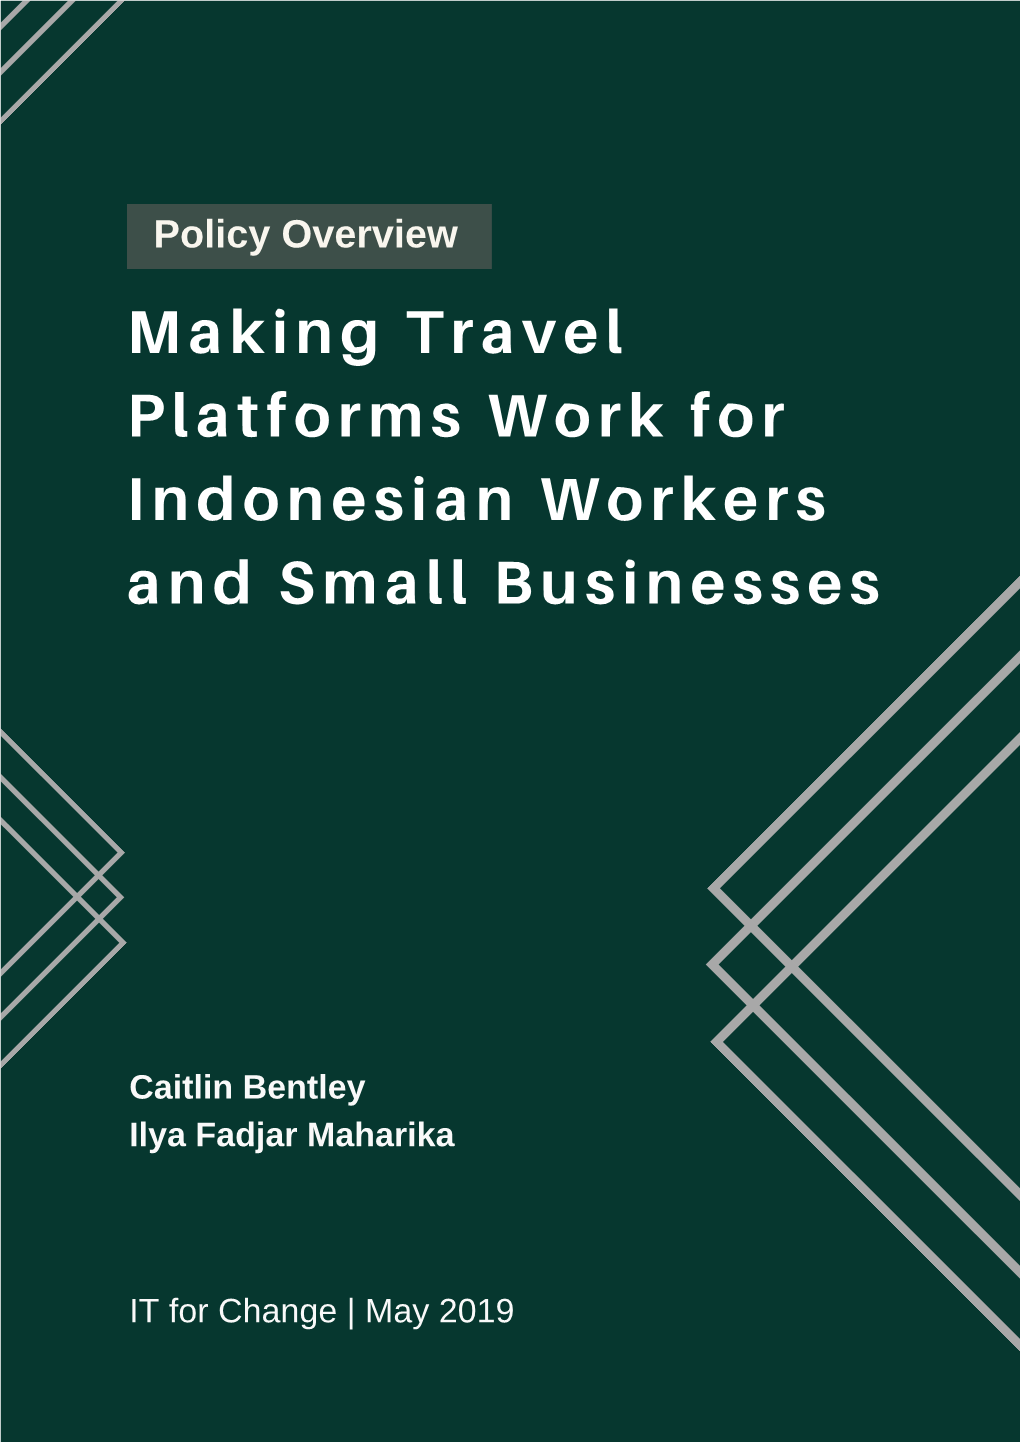 Making Travel Platforms Work for Indonesian Workers and Small Businesses